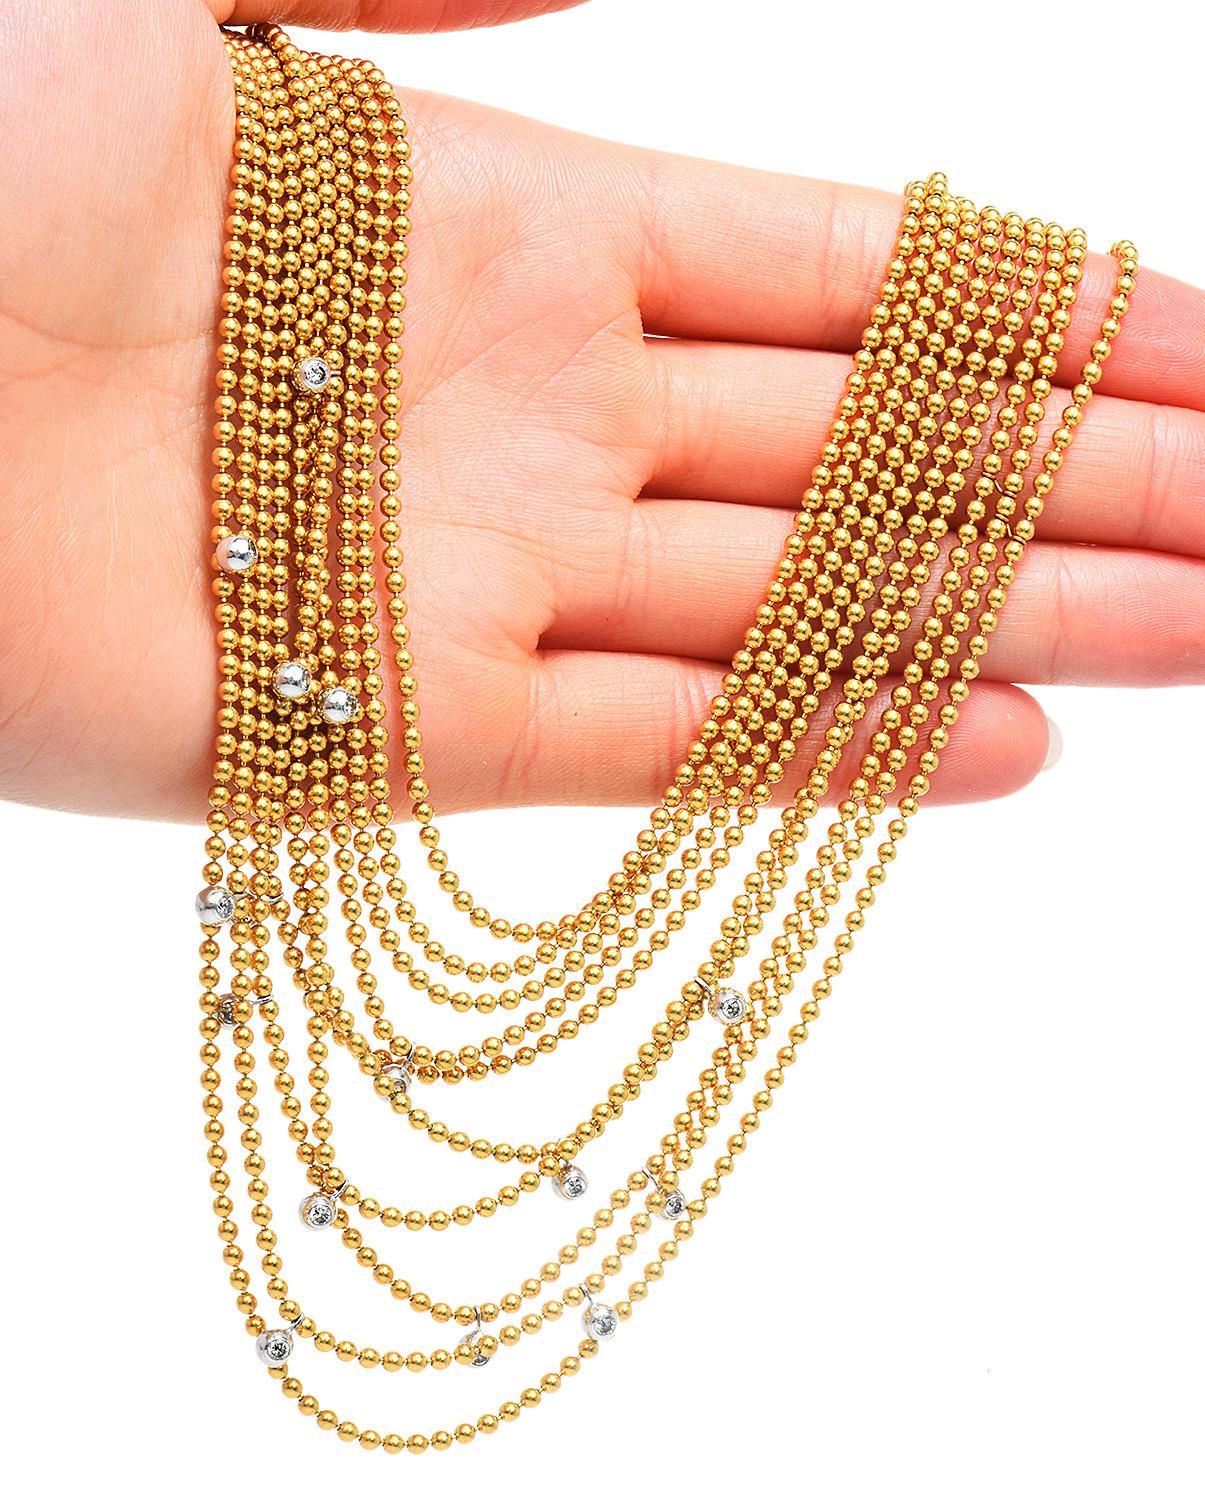 The House of Cartier presents their Collection Draperie de Décolleté circa 1930s.

This magnificent piece is crafted in solid 18K yellow gold beads, gradually presented in 10 strands of 2 mm width each.

Adding a touch of luxury, are 15 Genuine